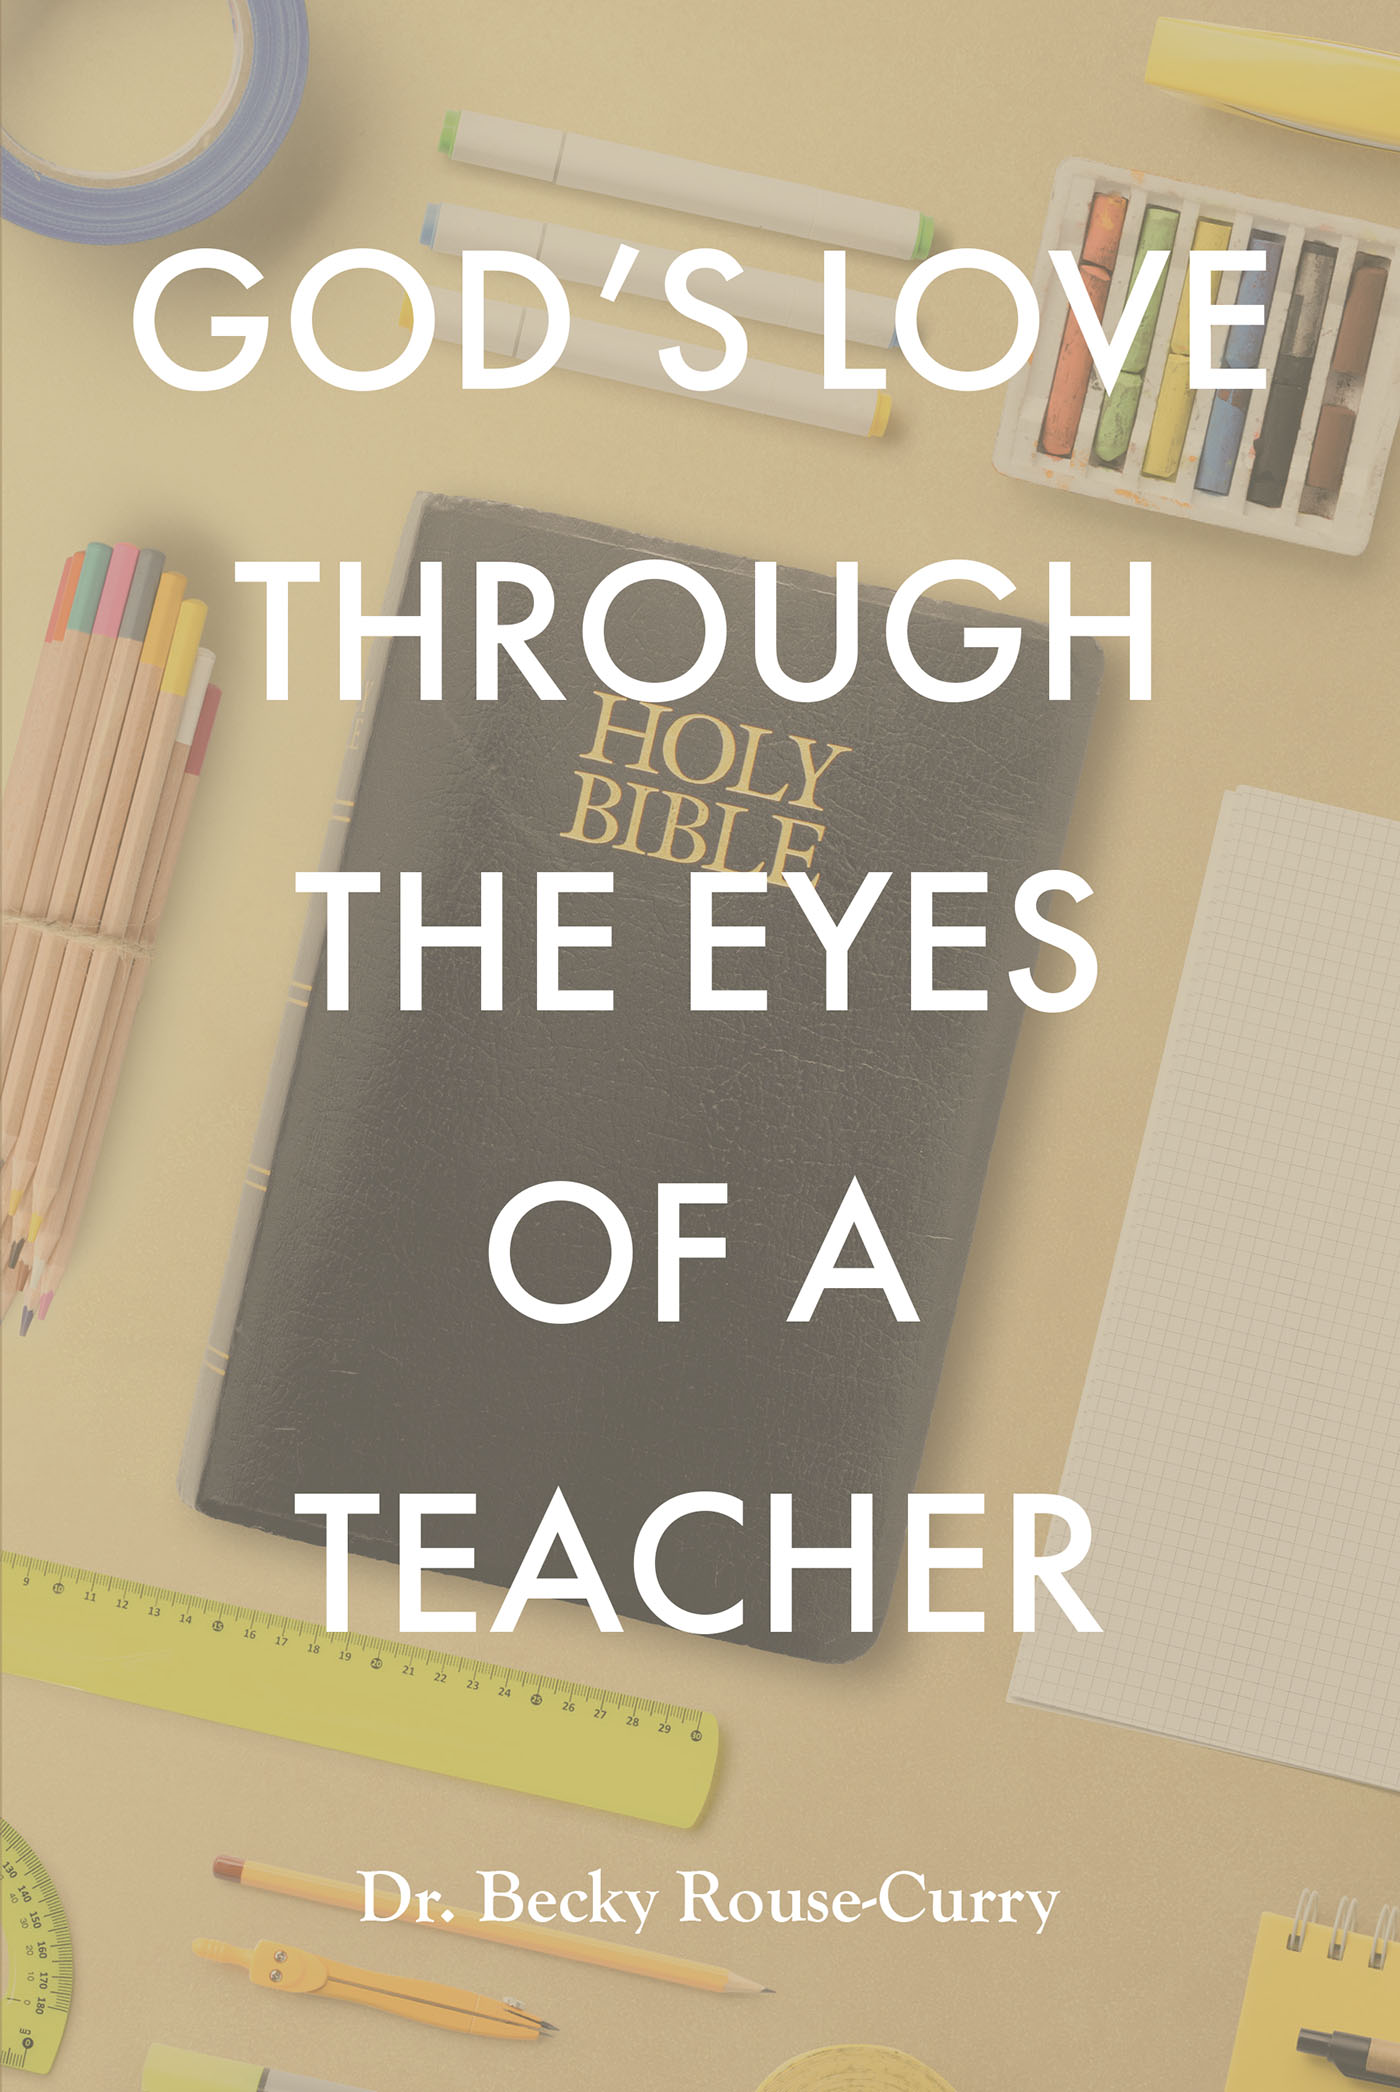 Dr. Becky Rouse-Curry’s Newly Released "God’s Love Through the Eyes of a Teacher" is a Reflective Memoir Meant to Inspire and Encourage